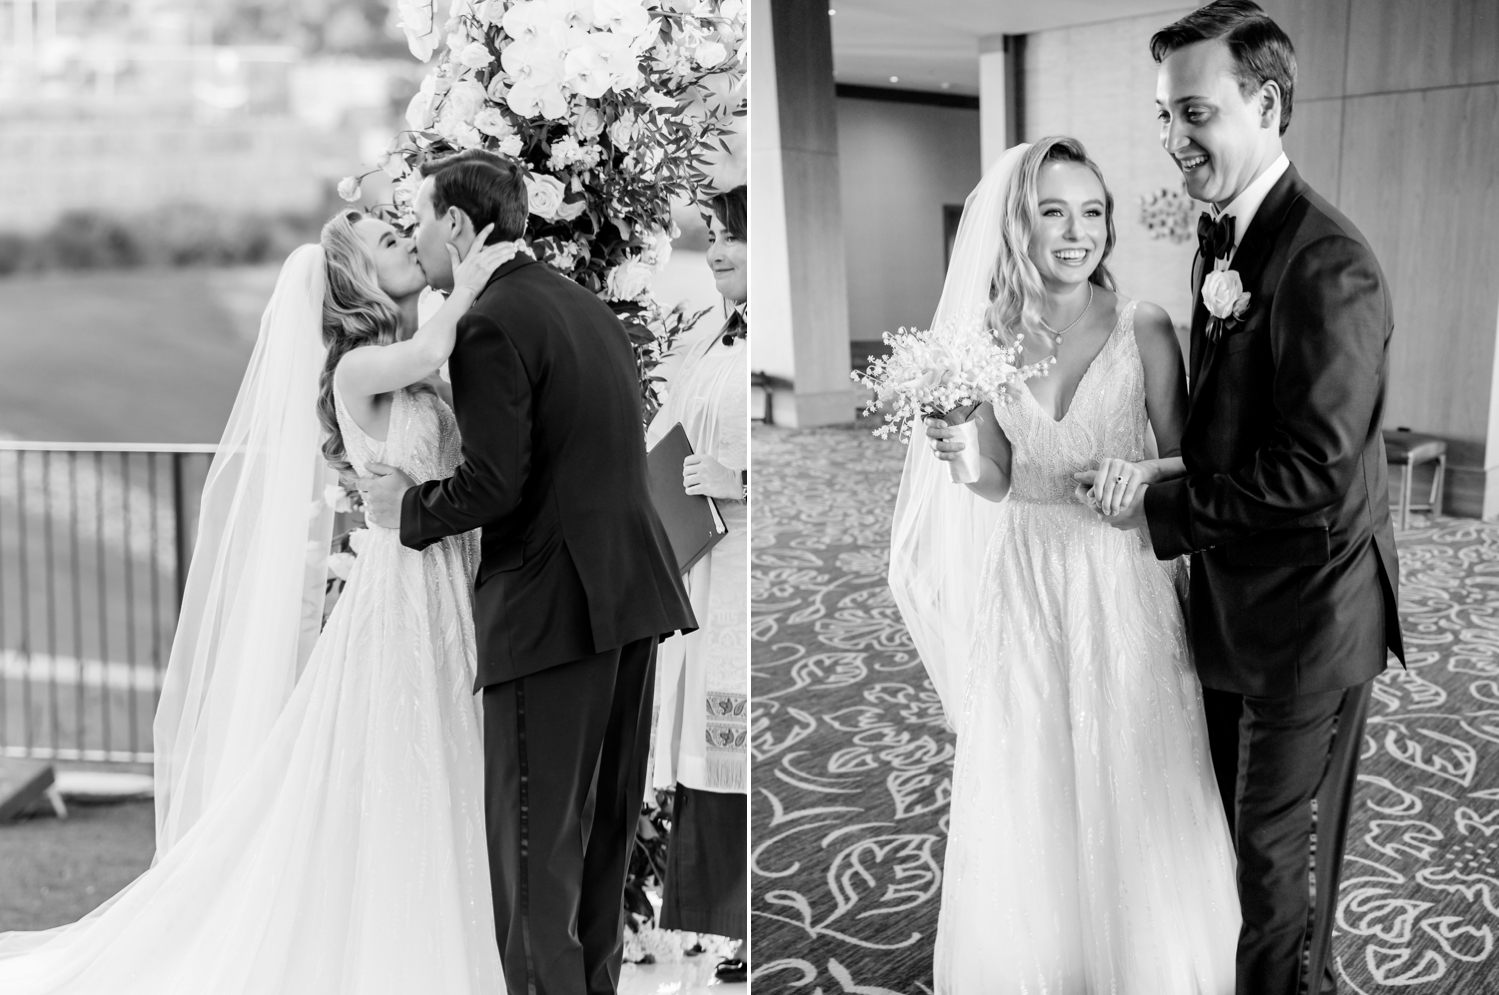 Left: The bride and groom kiss at the altar. Right: The bride and groom laugh and hold hands after the ceremony